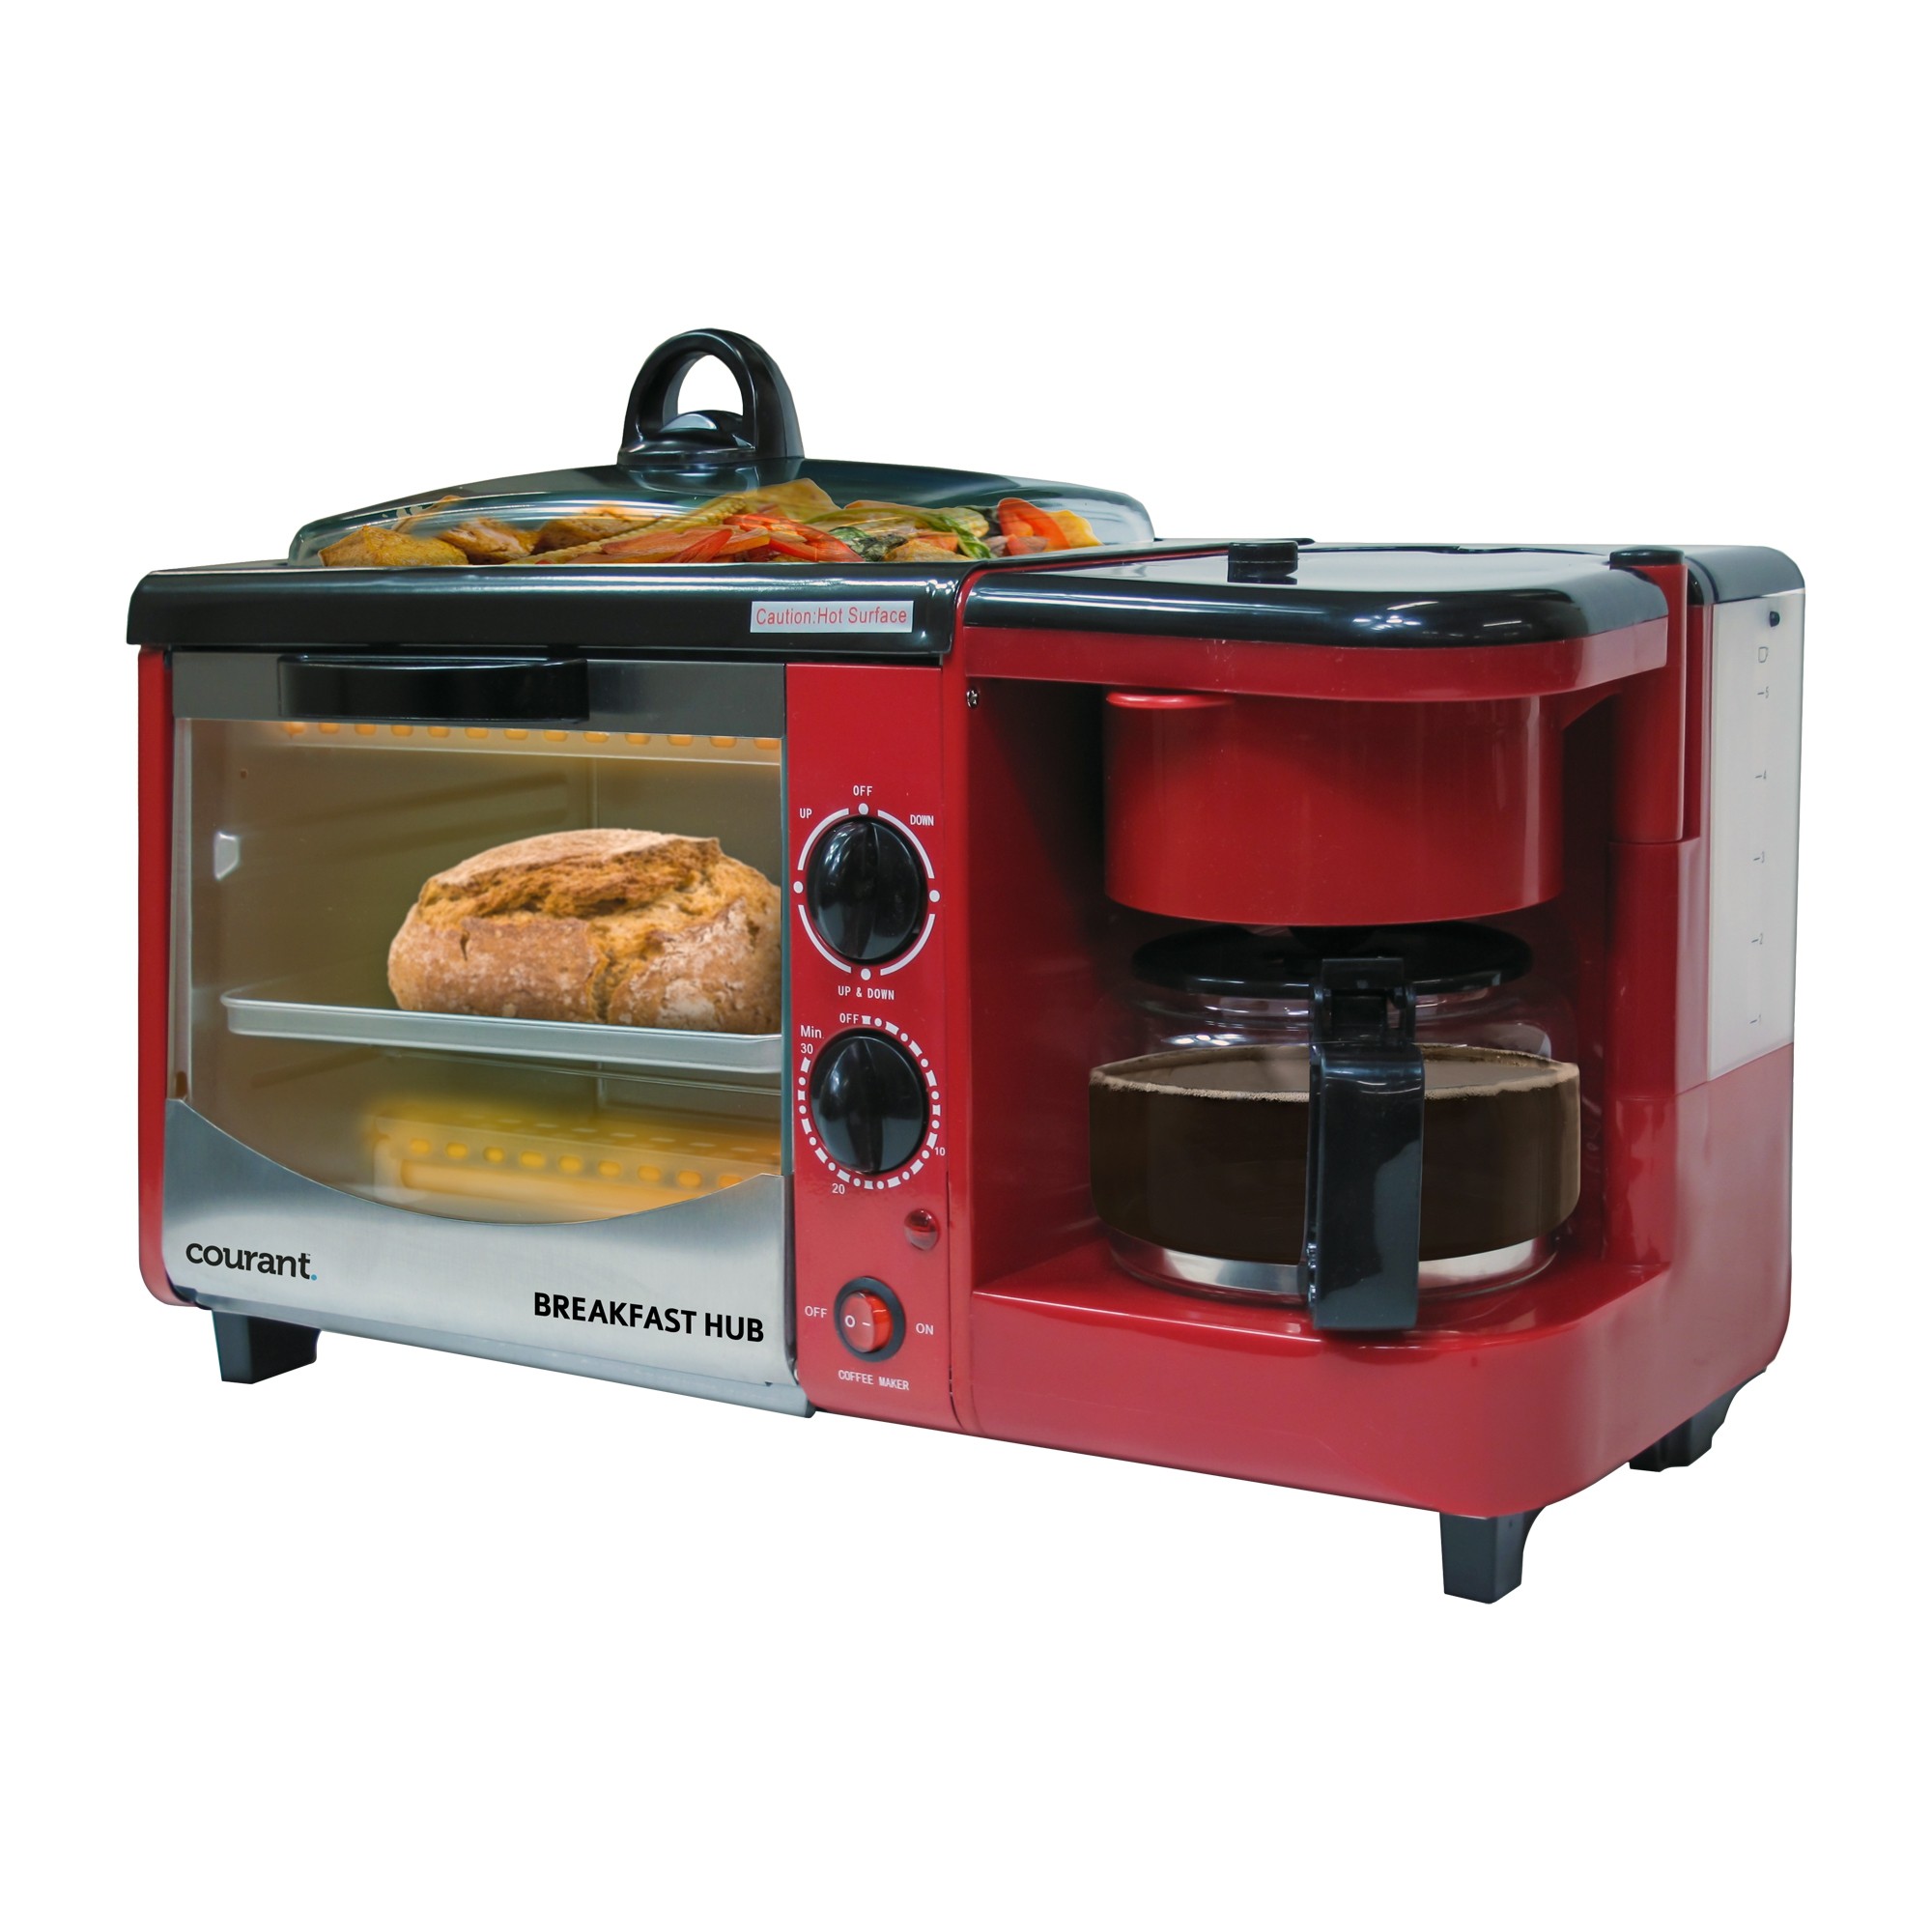 Courant 3-IN-1 Multifunction Breakfast Hub - Red